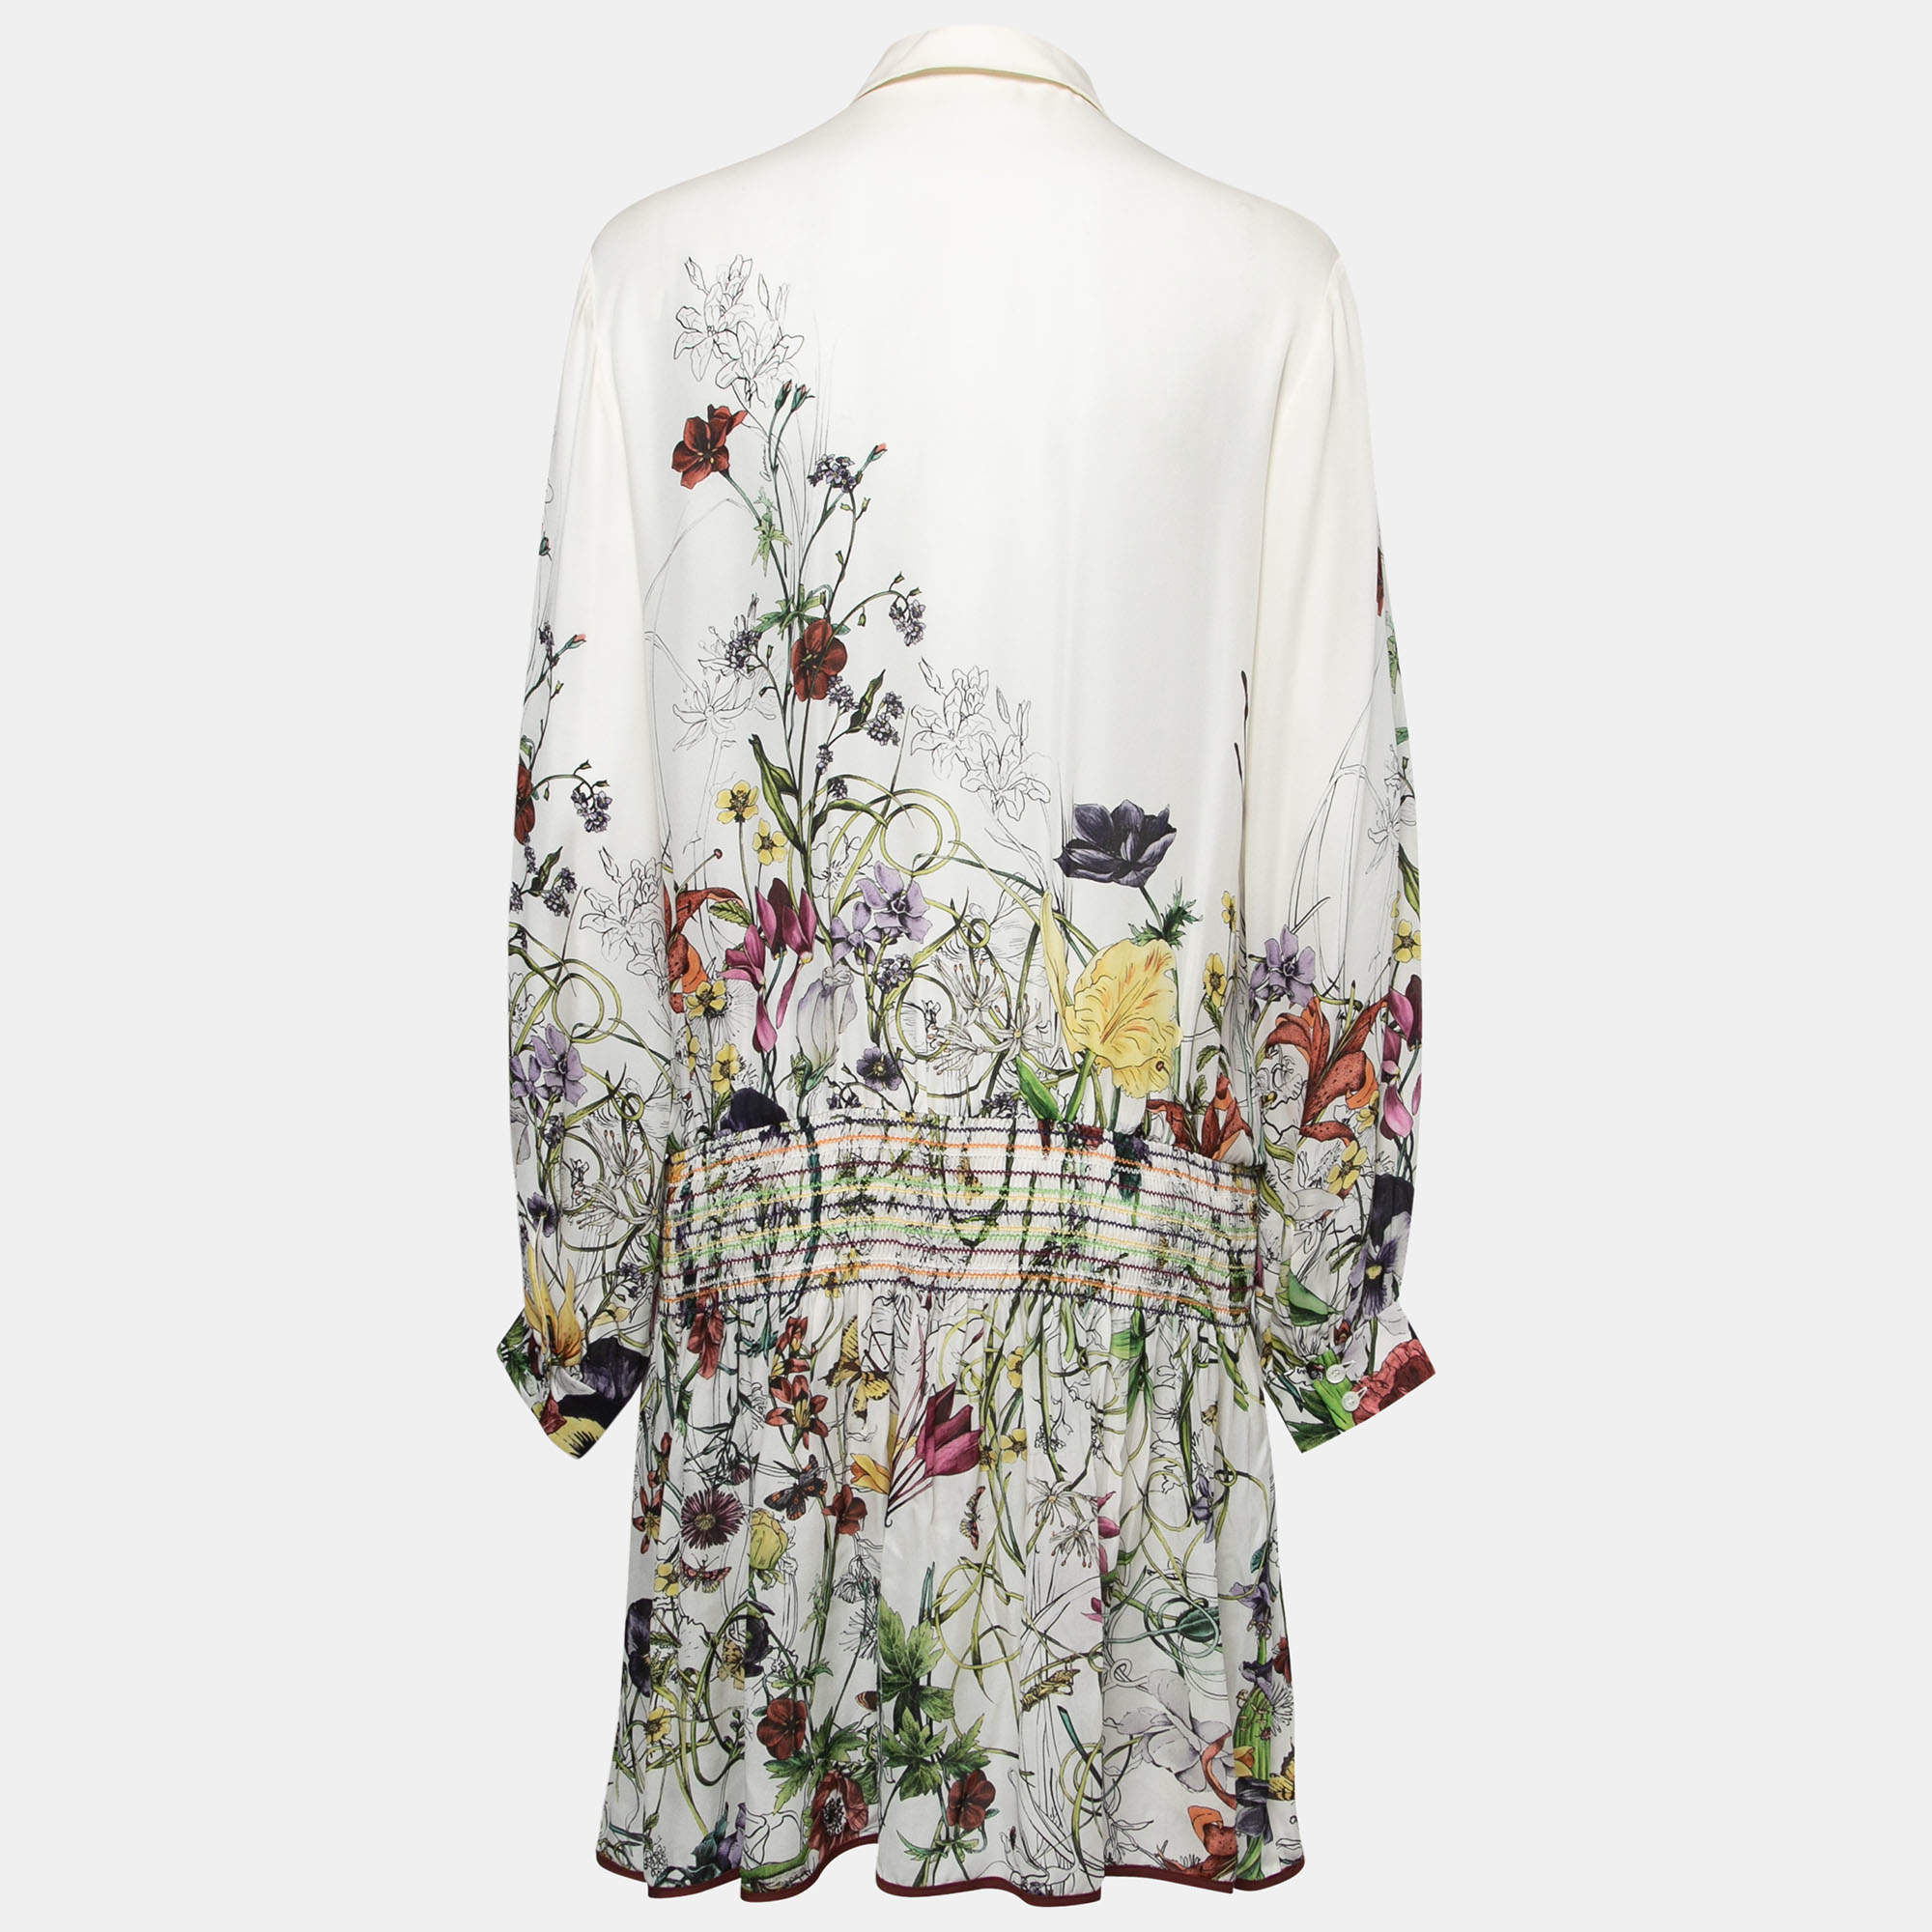 Gucci | Dresses | Gucci Dress Lovelight Cotton Embroidery Floral Knit Small  | Poshmark